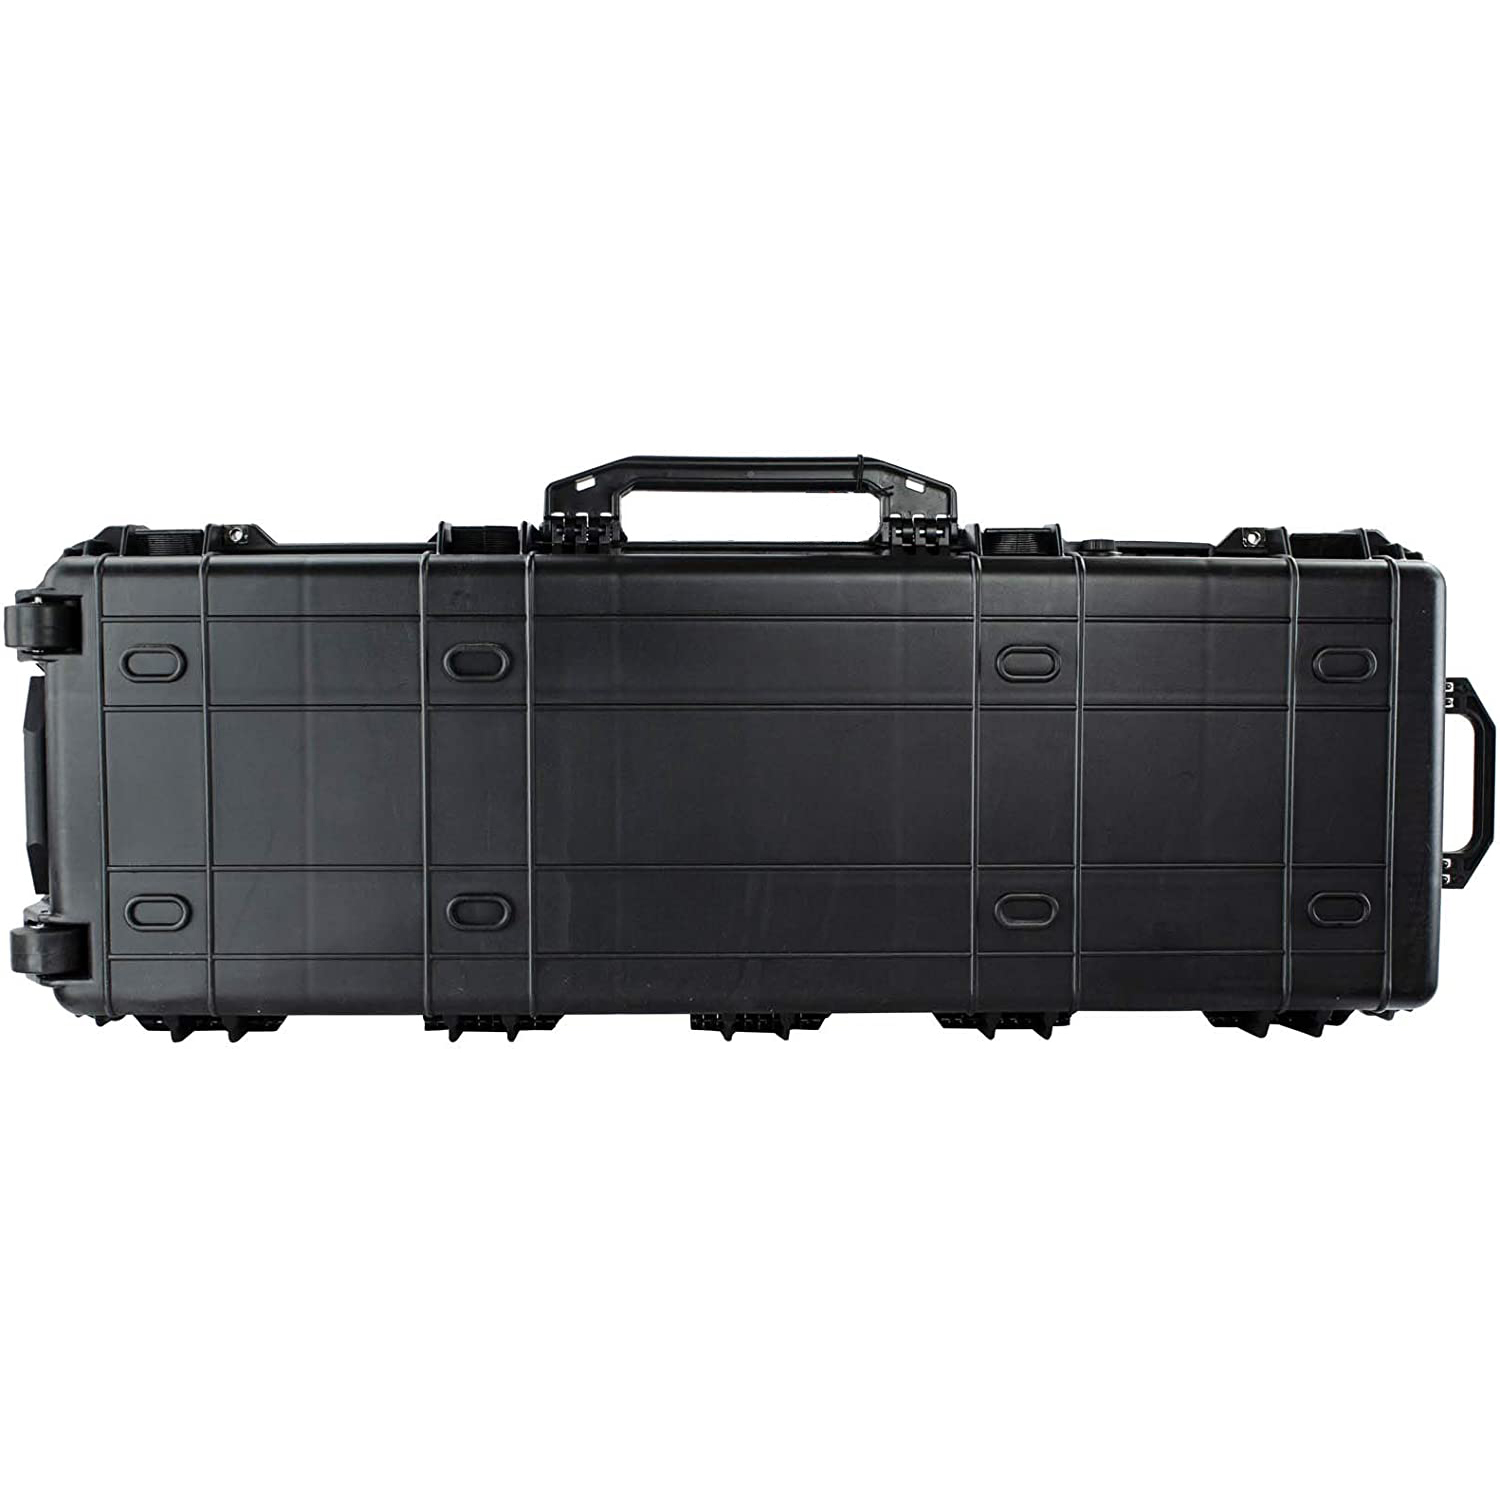 53" Inch Protective Roller Tactical Rifle Hard Case with Foam, Mil-Spec Waterproof & Crushproof, Two Rifles Or Multiple Guns, Pressure Valve with Lockable